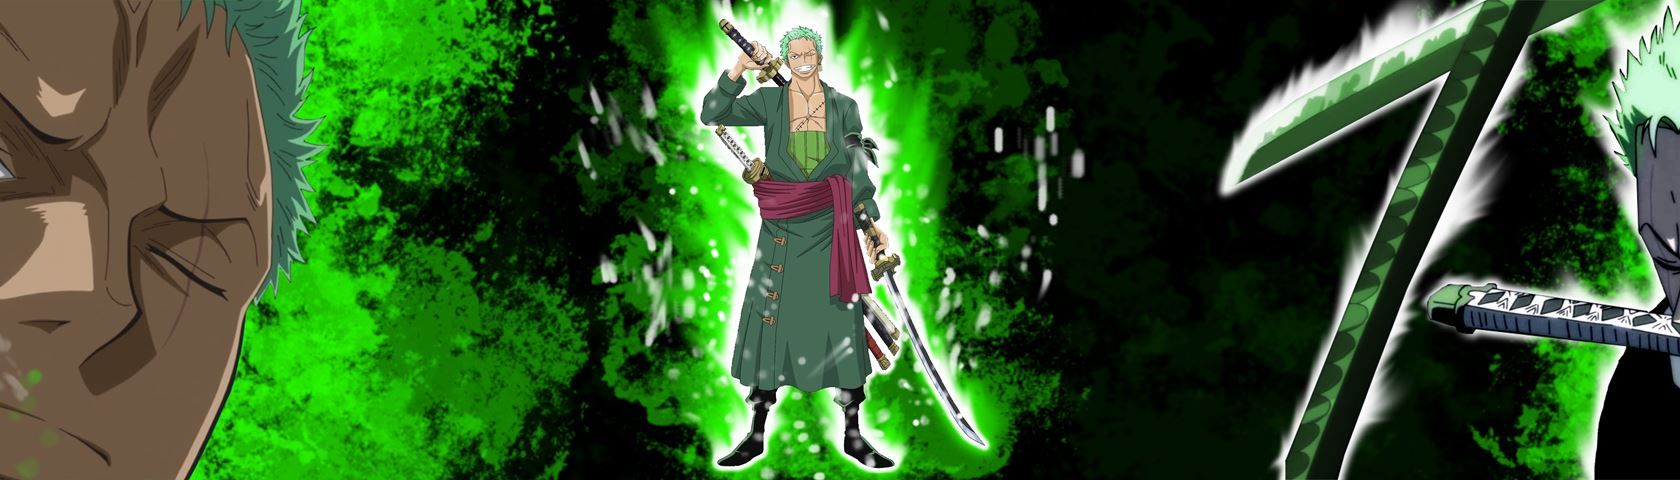 One Piece Zoro Triple Monitor Wallpaper HD • Image • WallpaperFusion by Binary Fortress Software